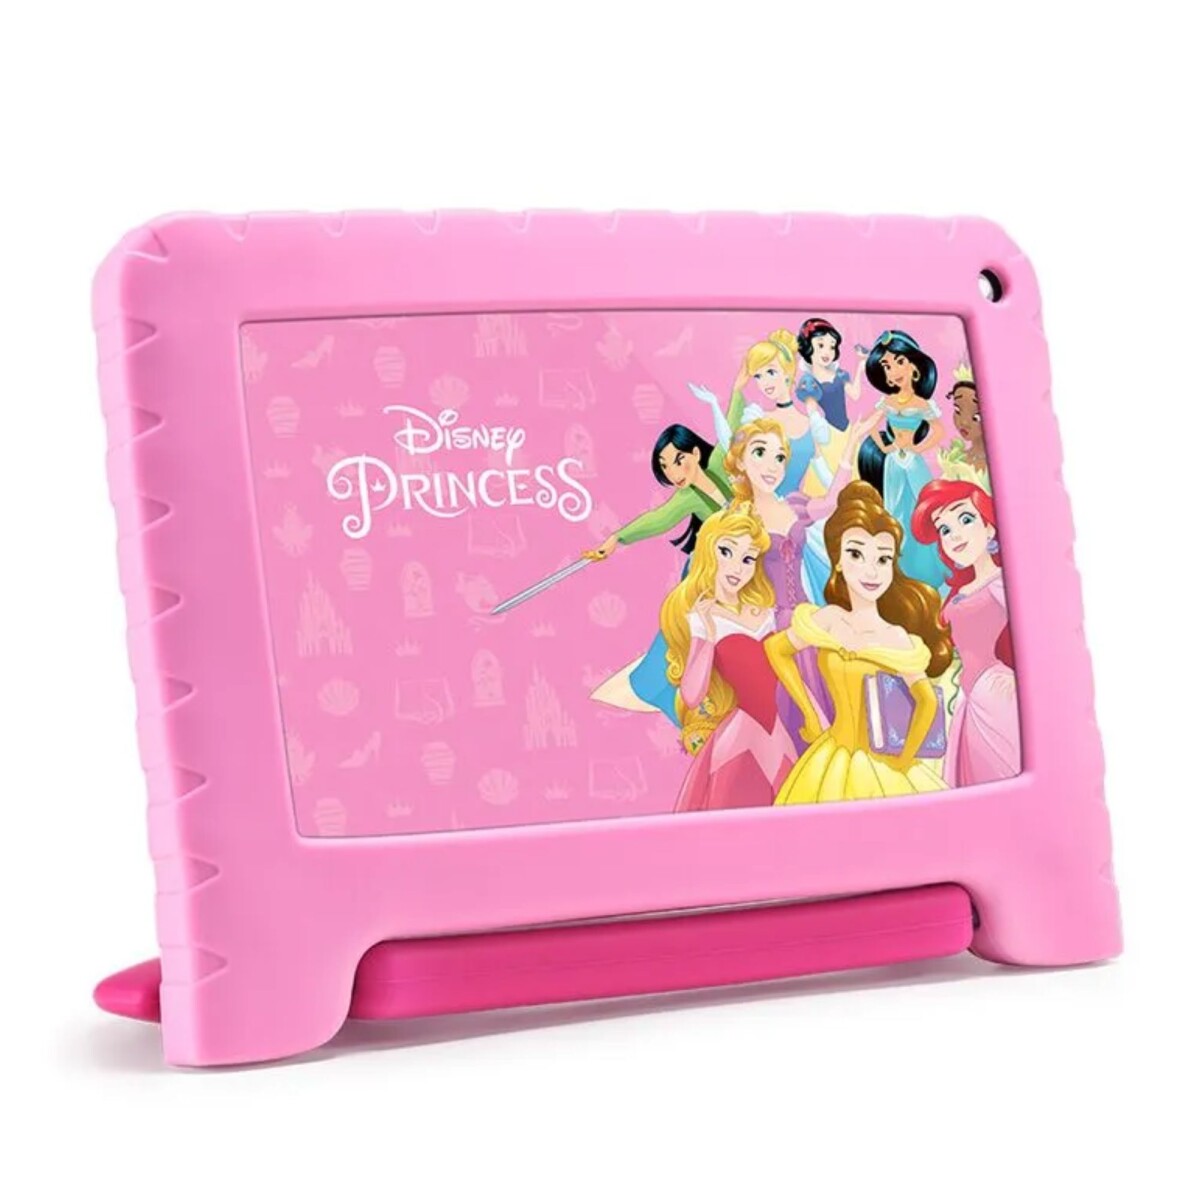 Tablet Multilaser Kid Android QC/32GB/2G/7"/WIFI/Rosa Princesas 